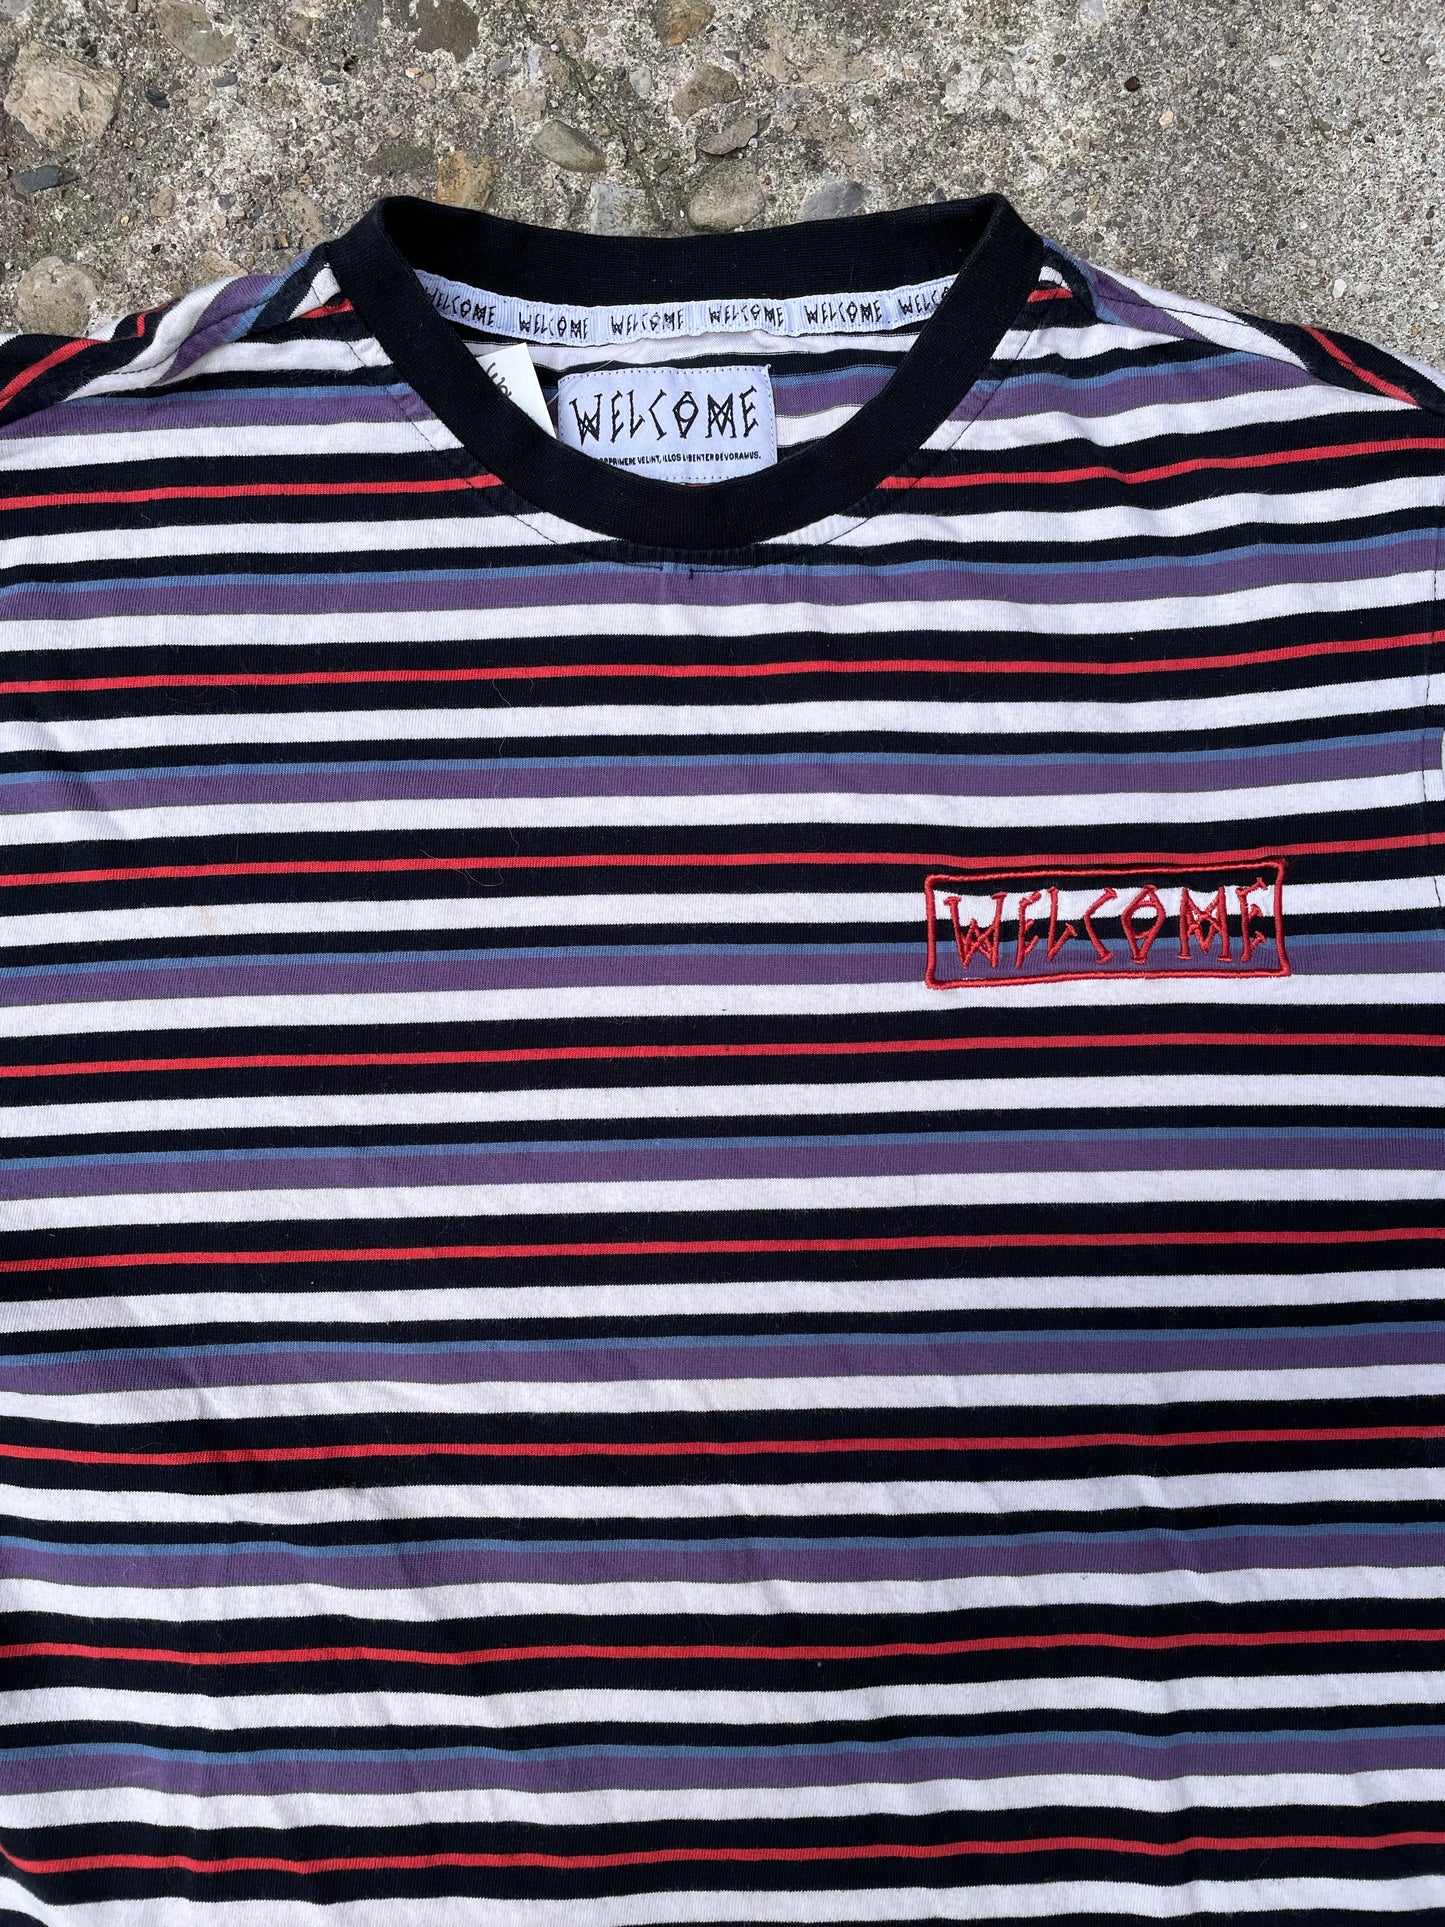 Welcome Skateboards Striped T-Shirt - M